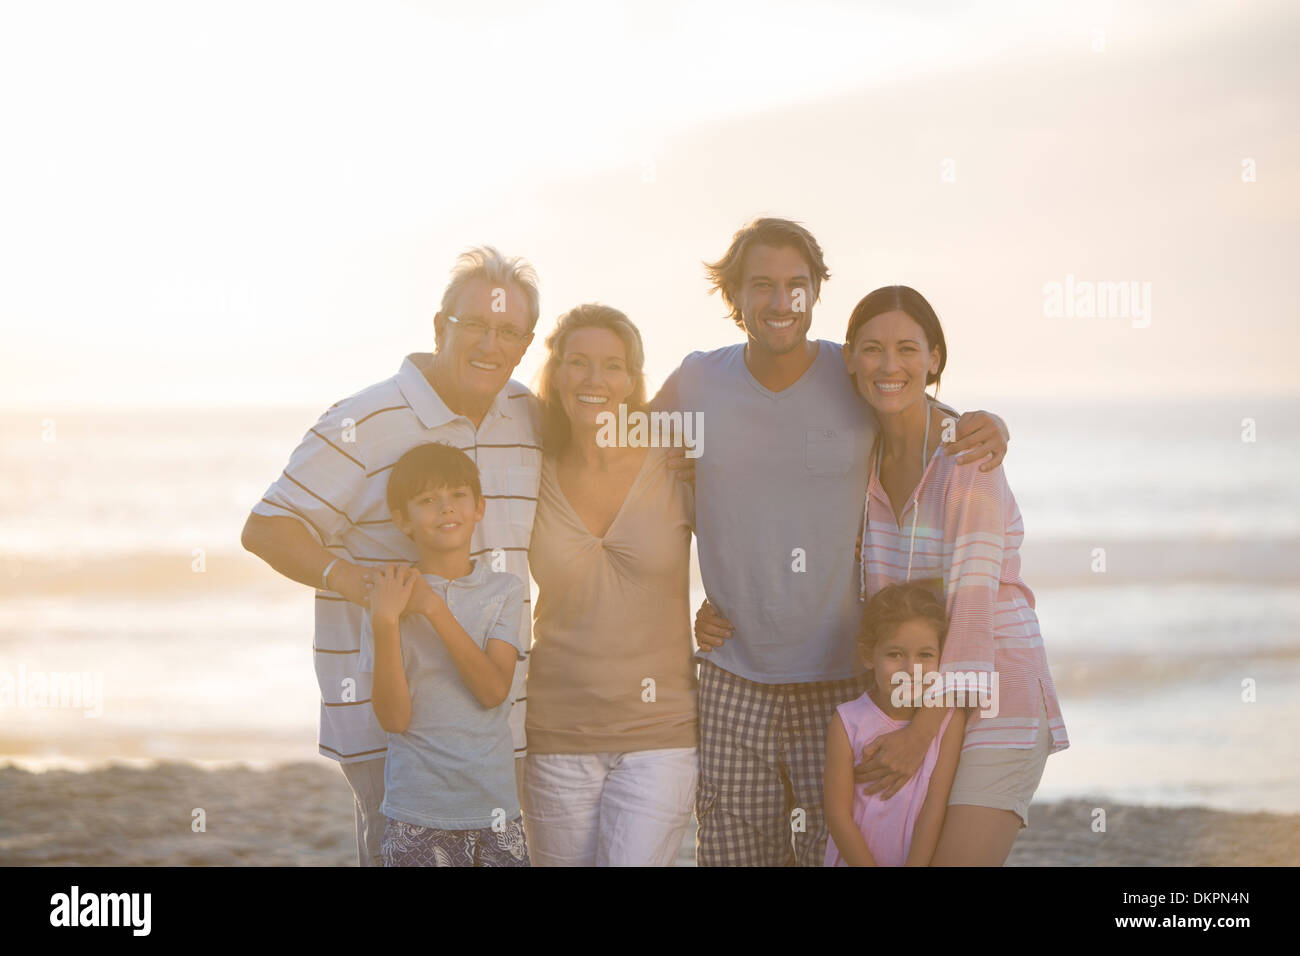 Family smiling together on beach Stock Photo